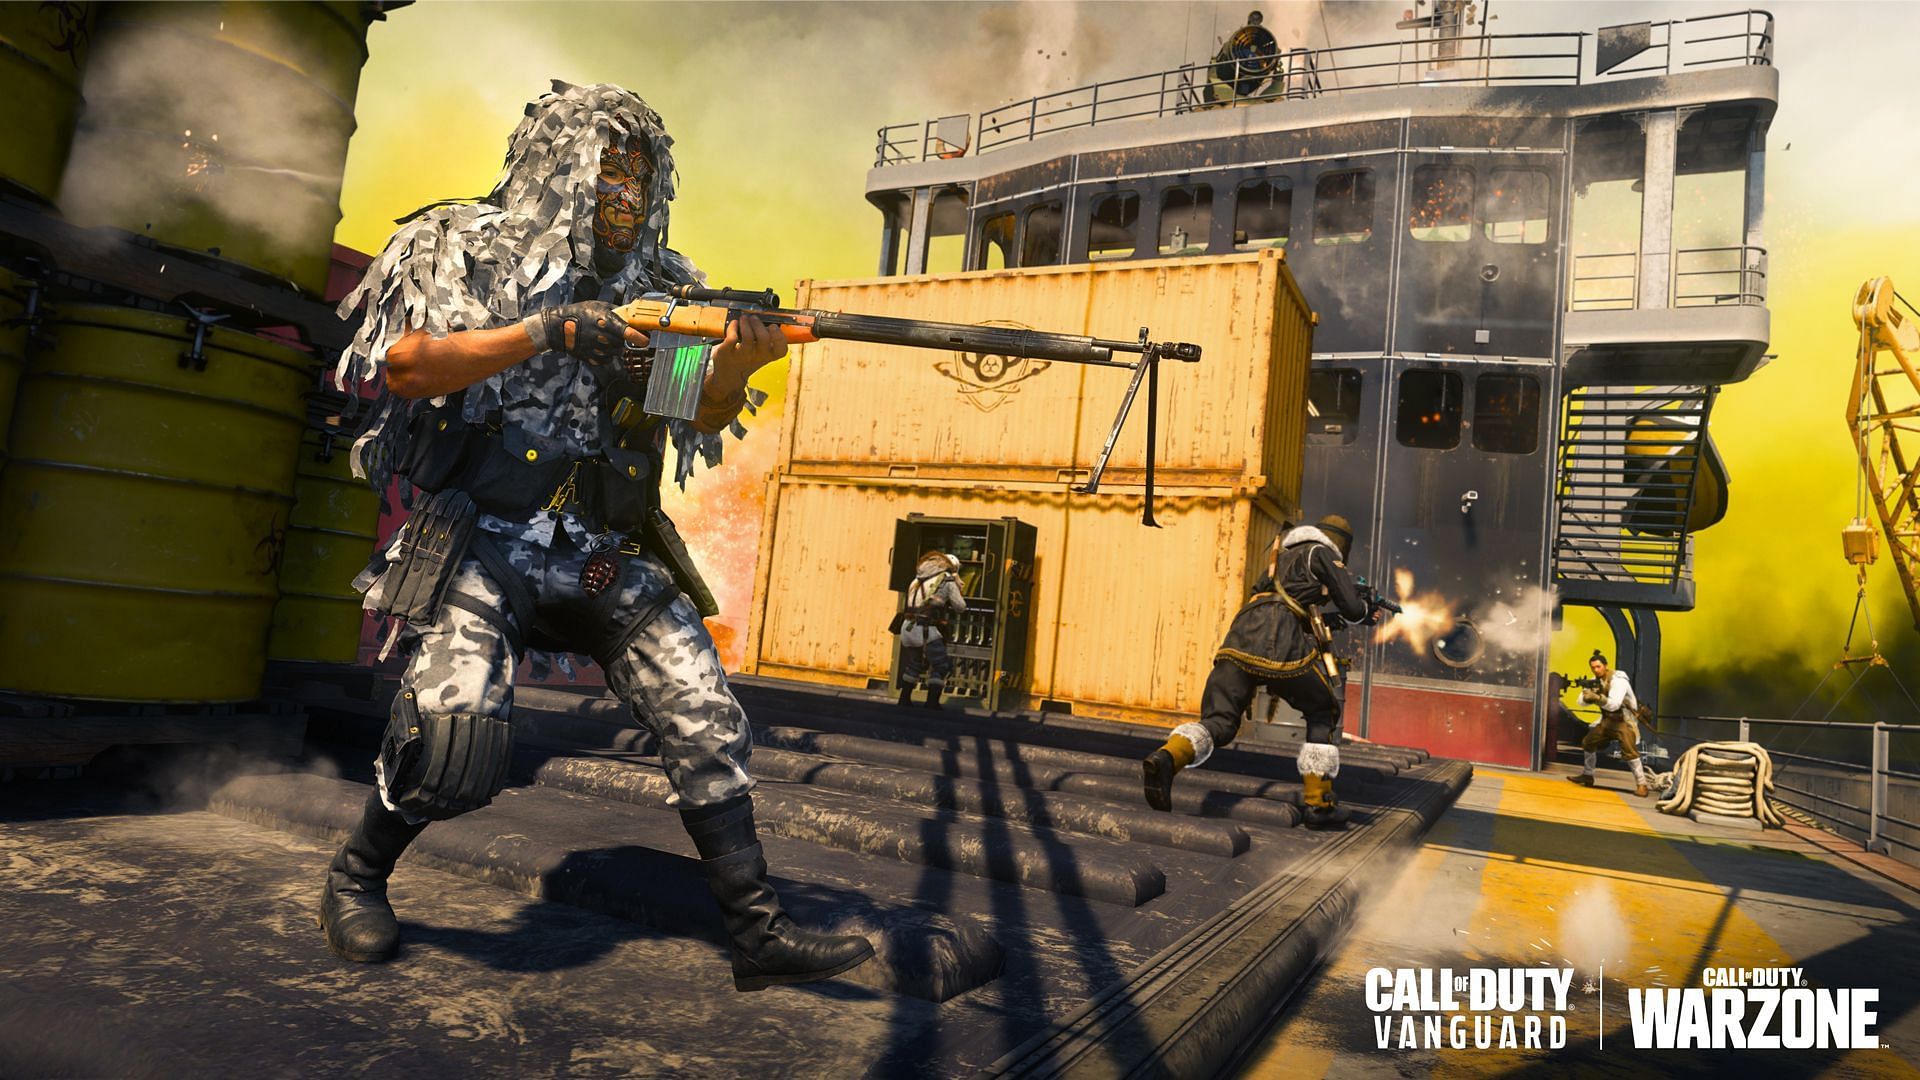 Unlock the &ldquo;golden bunkers&rdquo; in Call of Duty Vanguard and Warzone Season 3 Classified Arms Reloaded (Image by Activision)